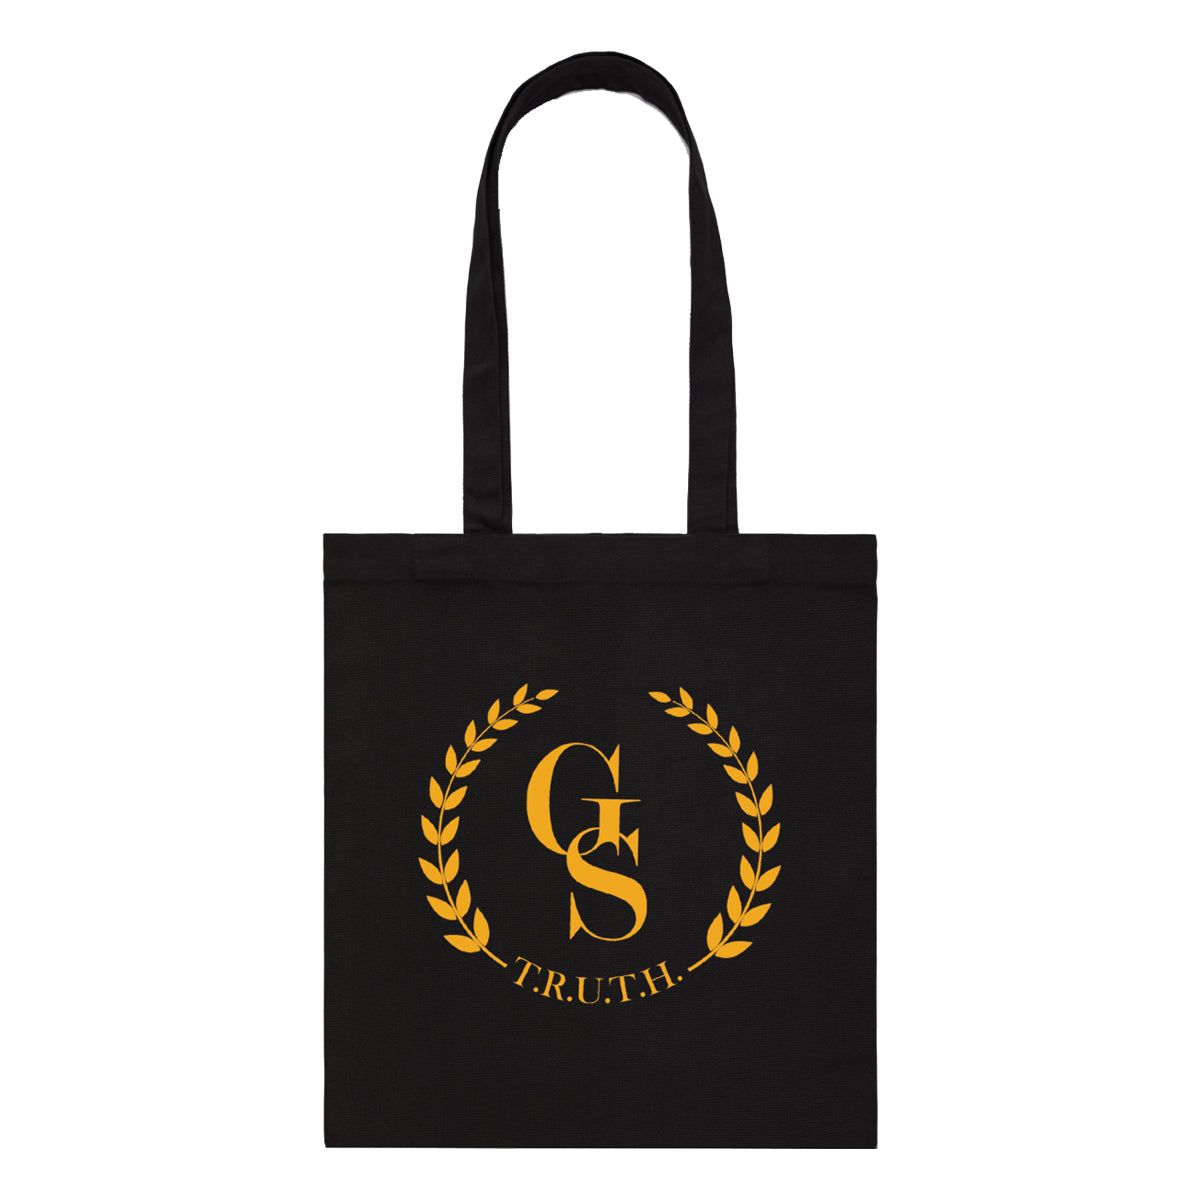 Black long handle tote bag with gold GS Truth Emblem logo on front